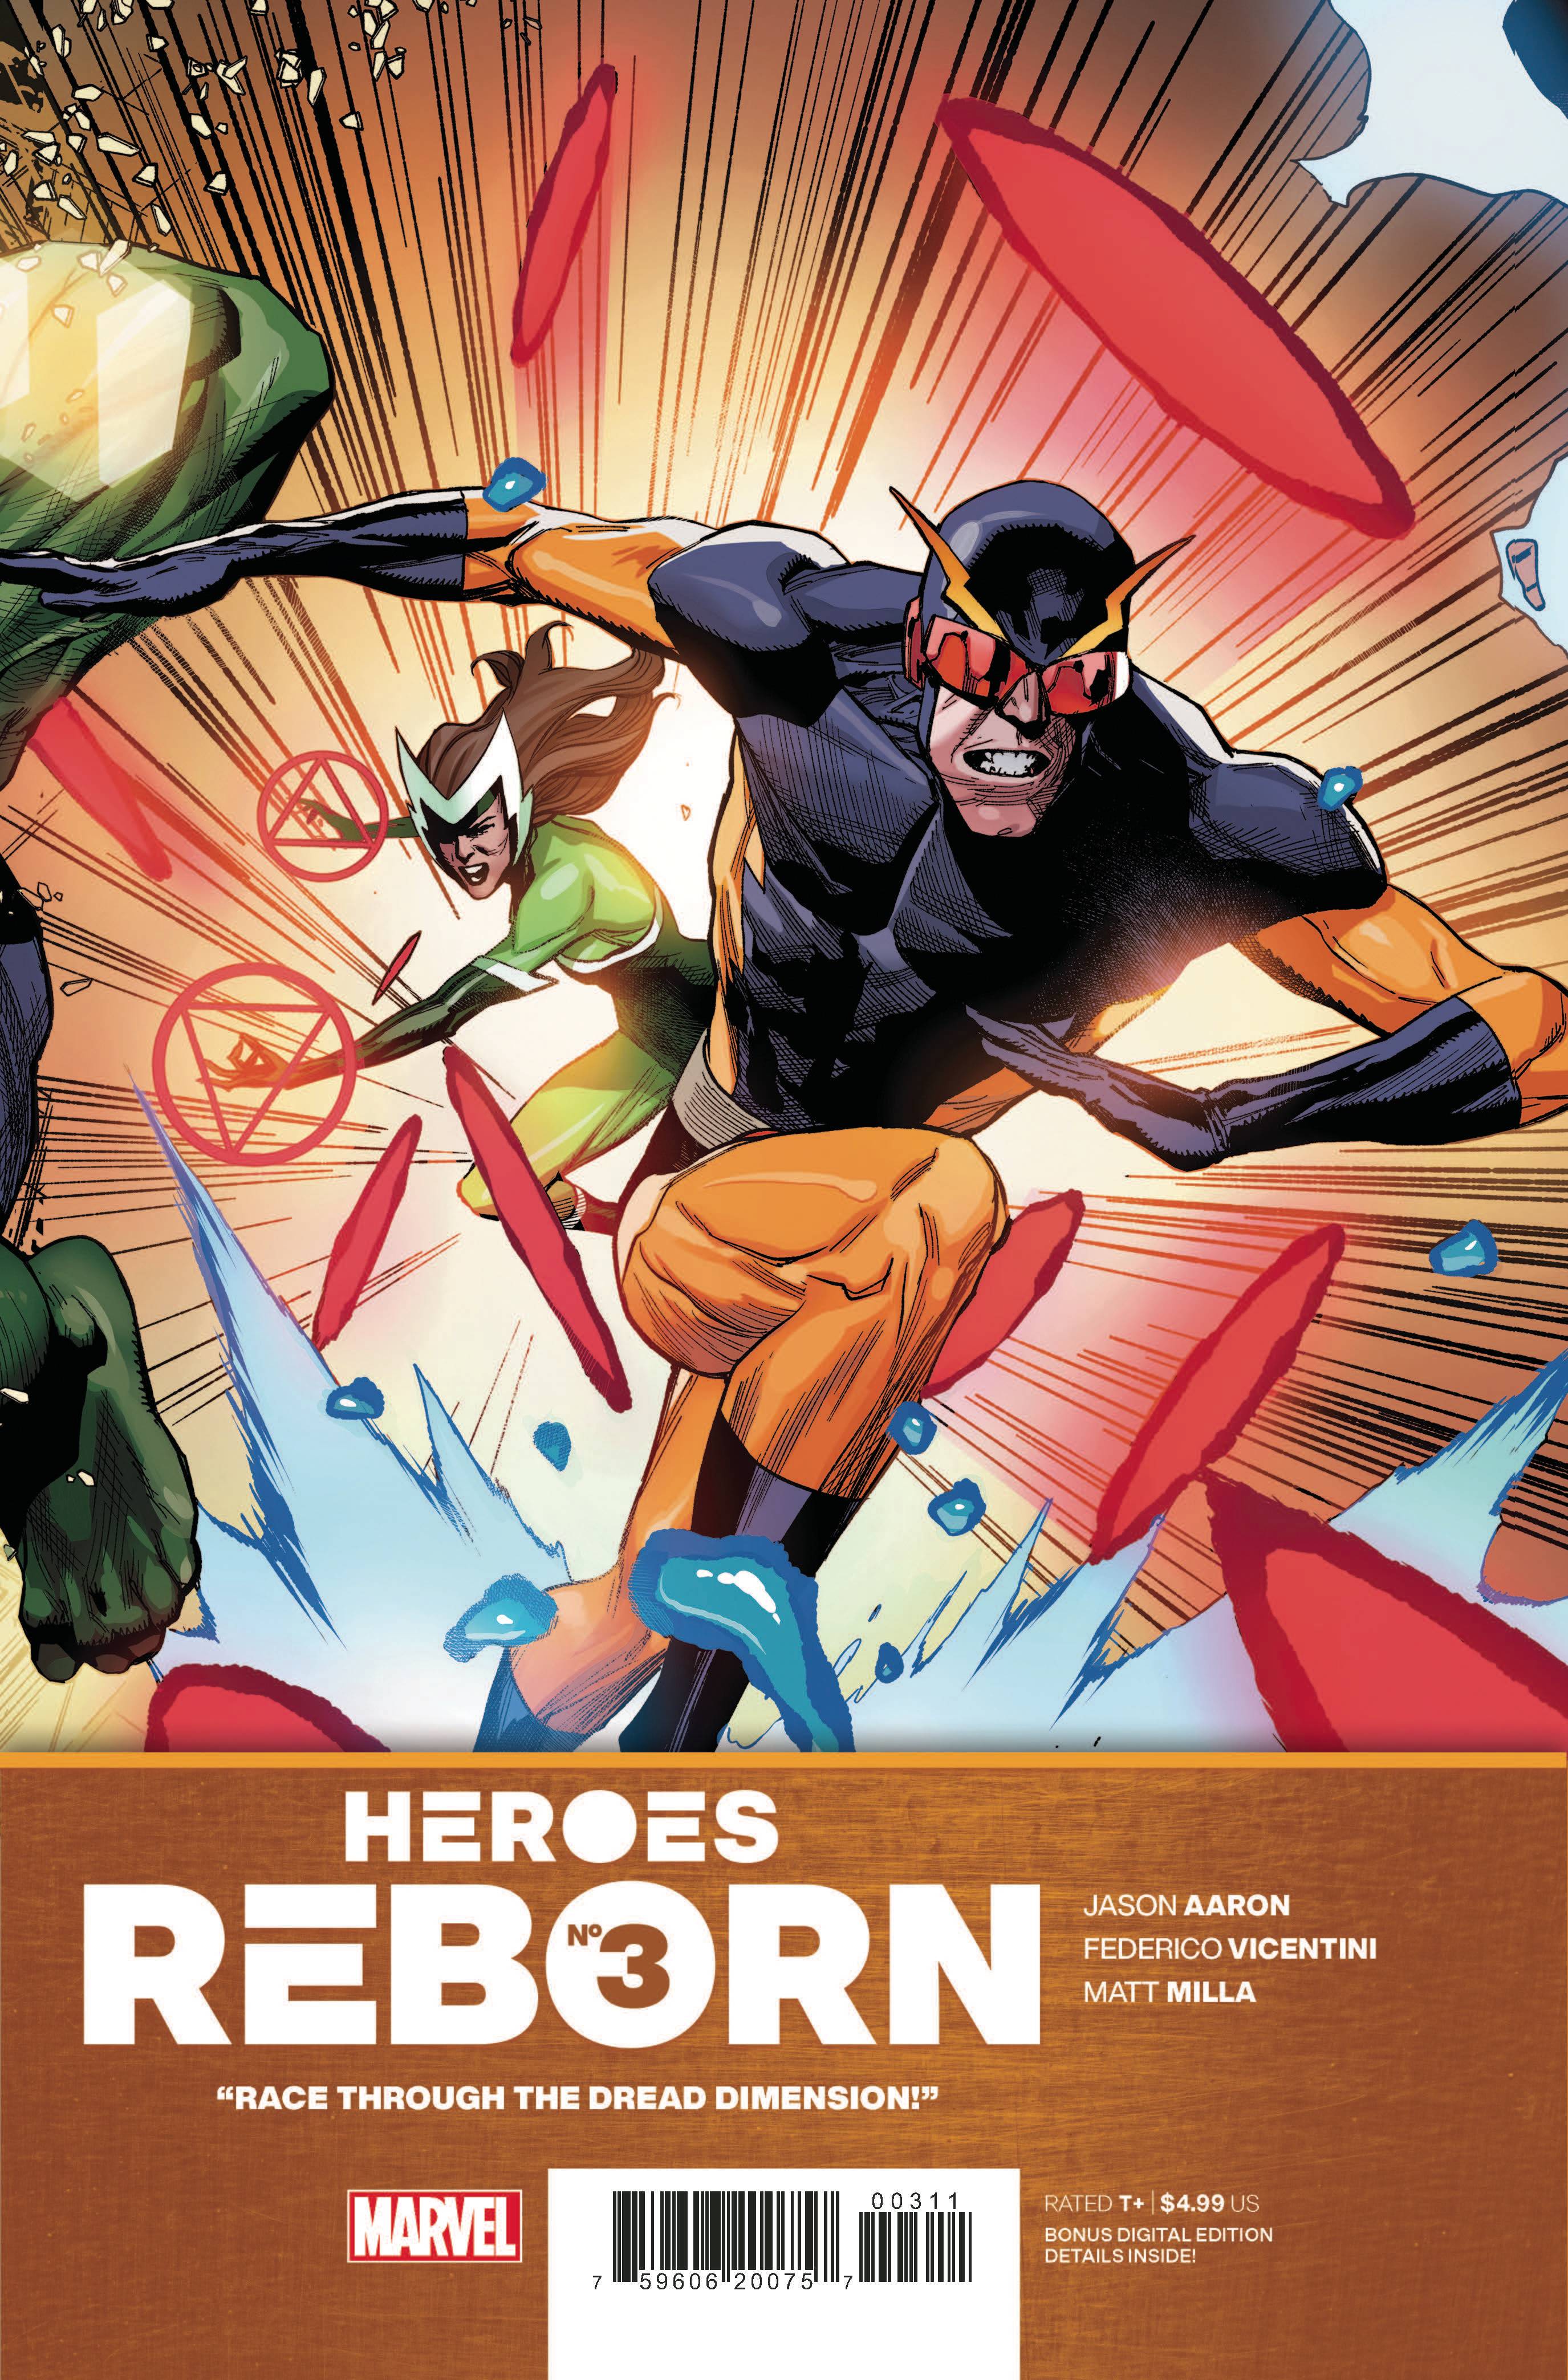 HEROES REBORN #3 (OF 7) | Game Master's Emporium (The New GME)